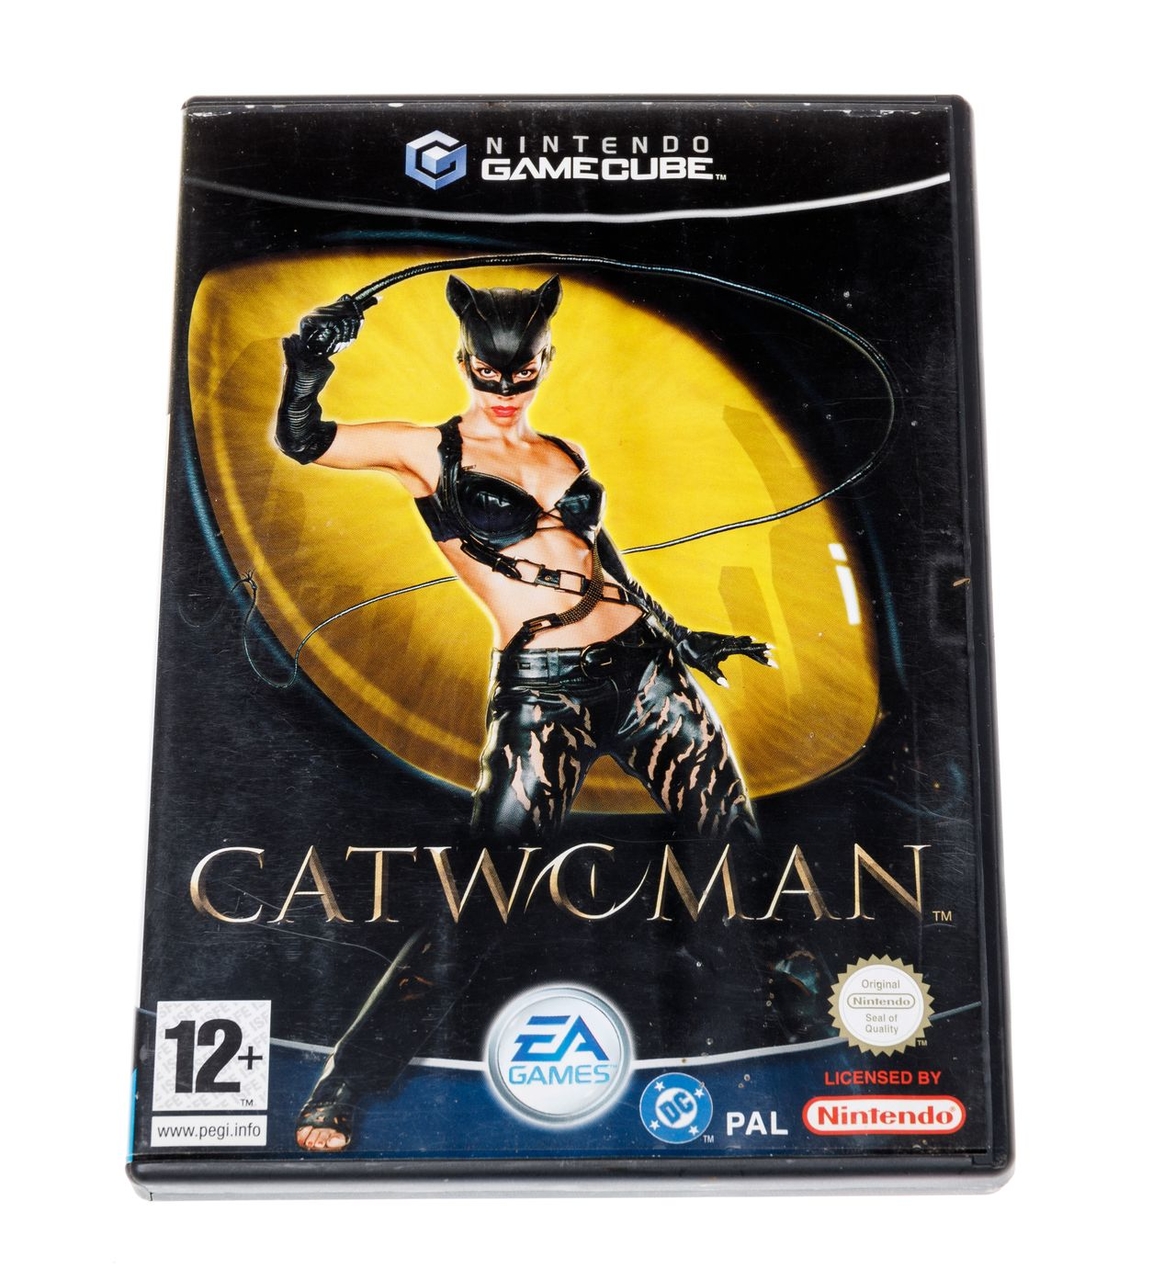 Catwoman - Gamecube Games